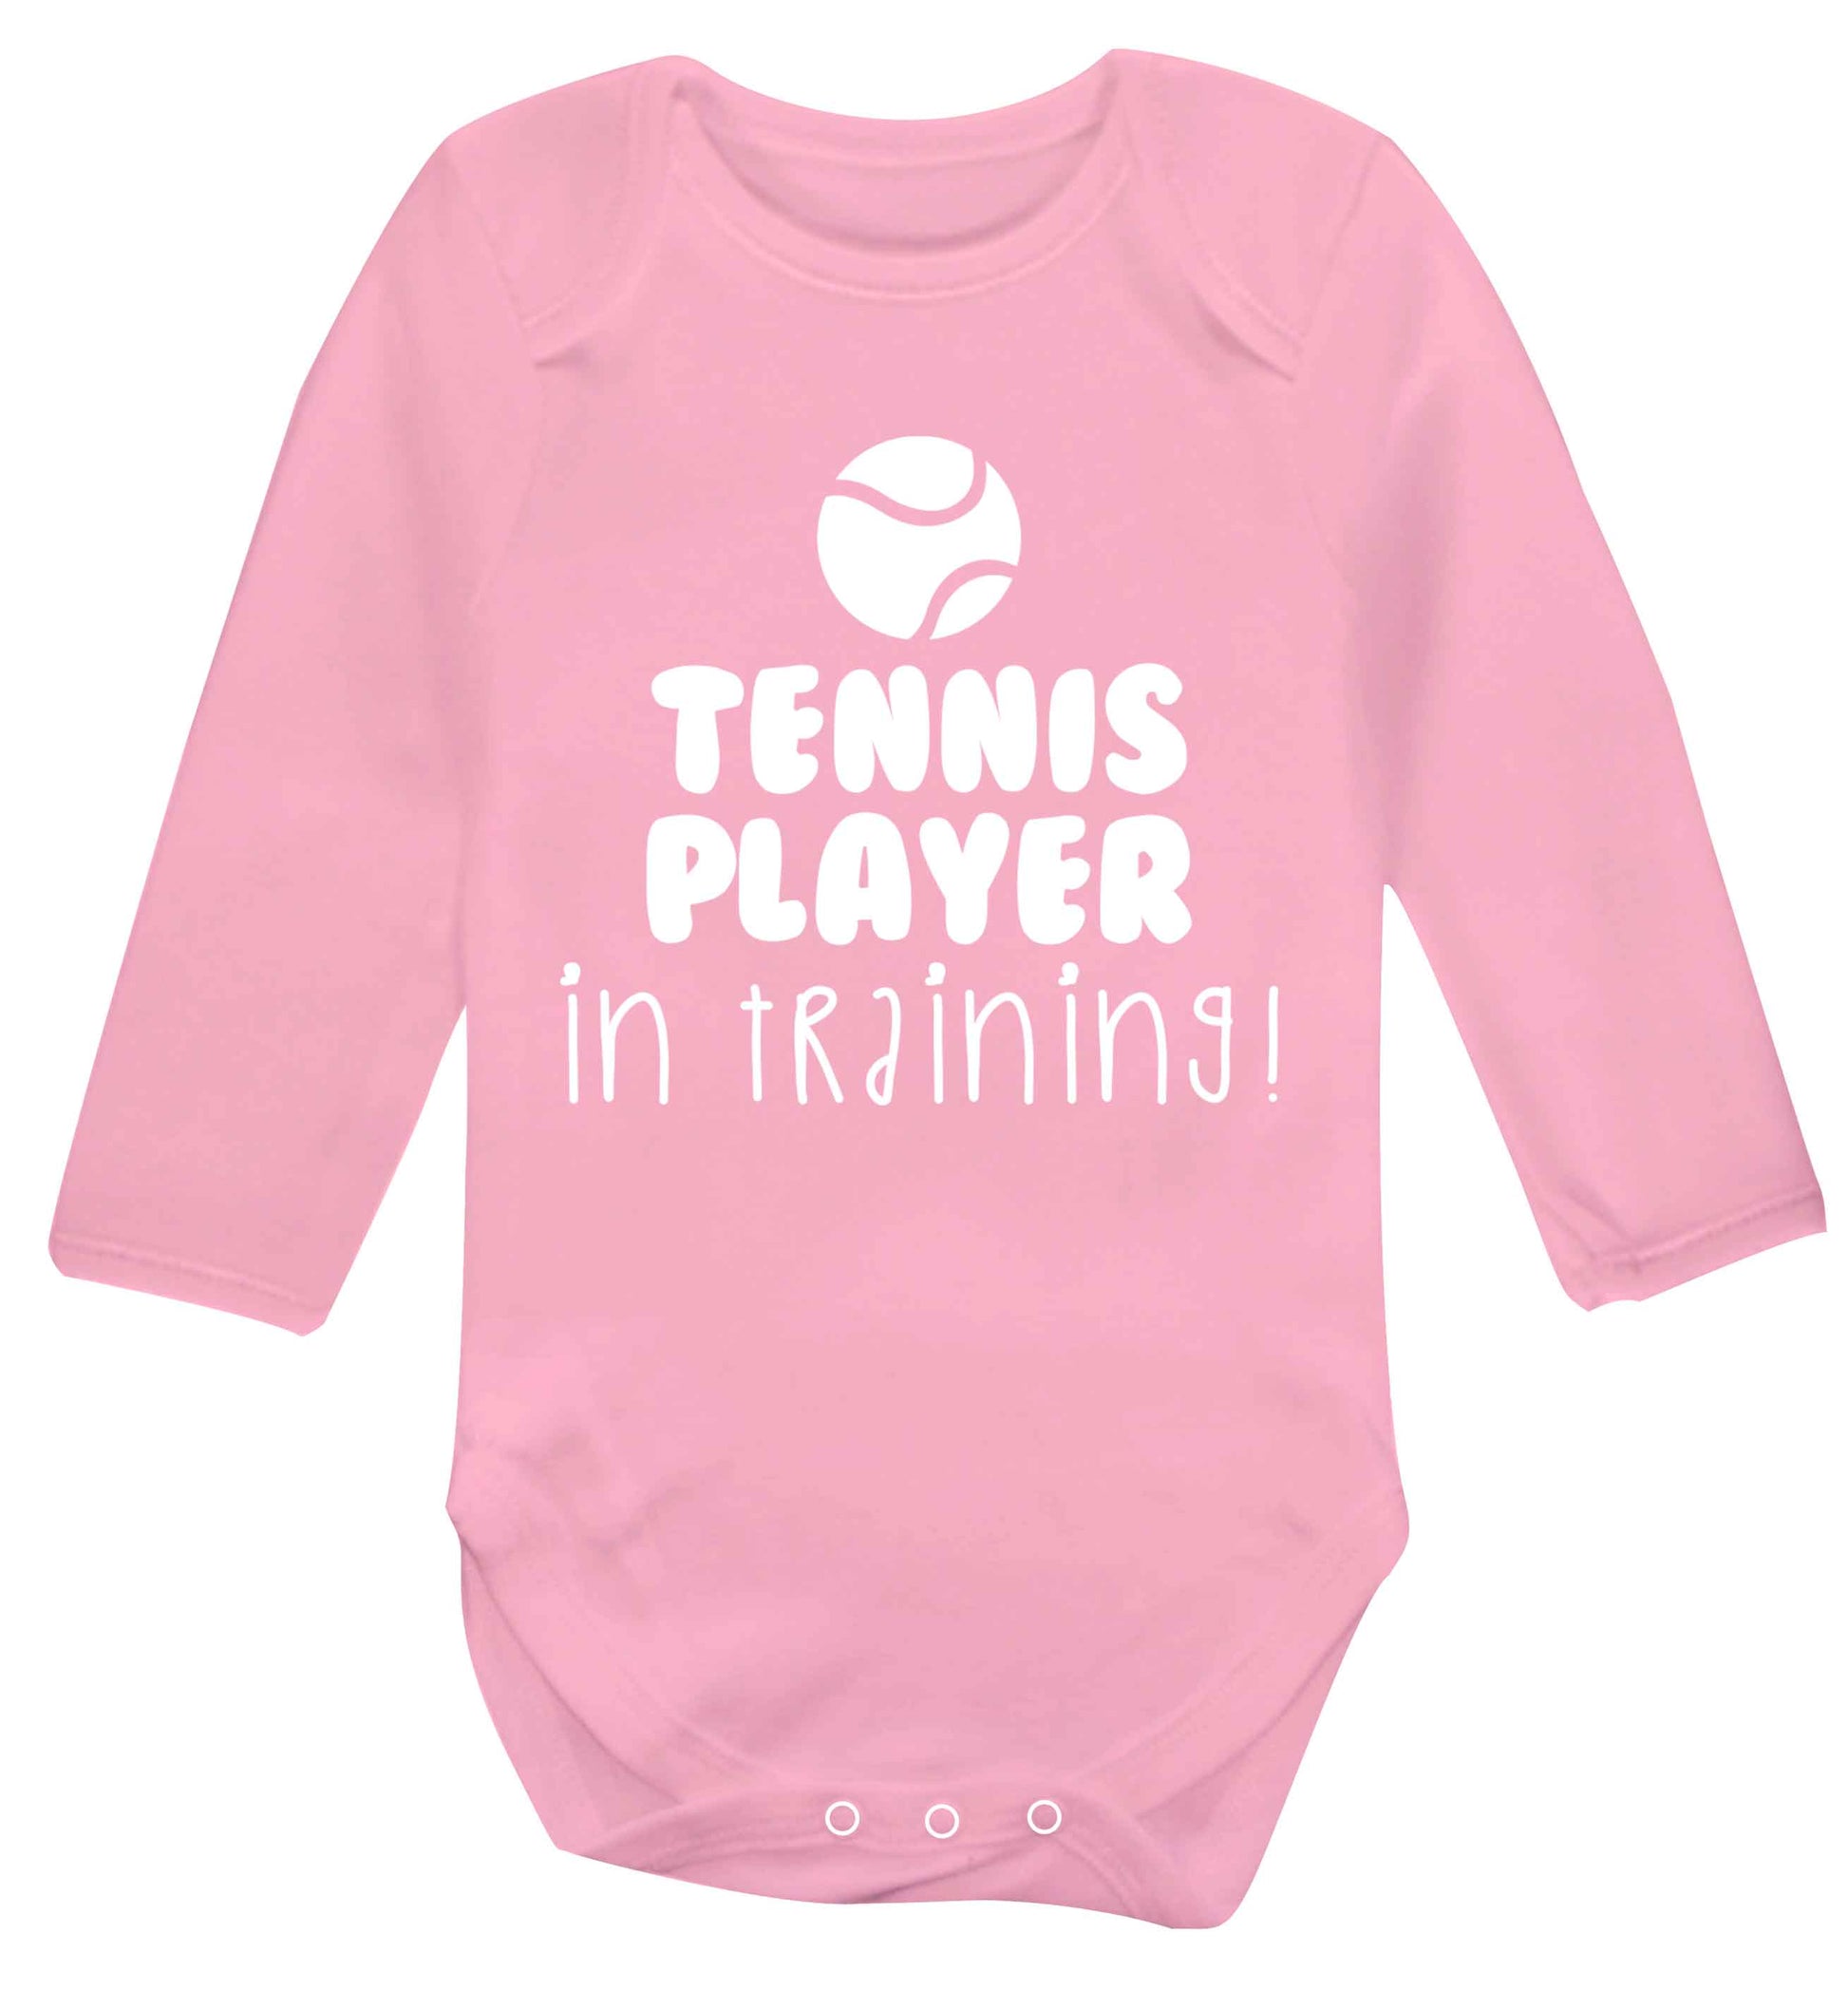 Tennis player in training Baby Vest long sleeved pale pink 6-12 months